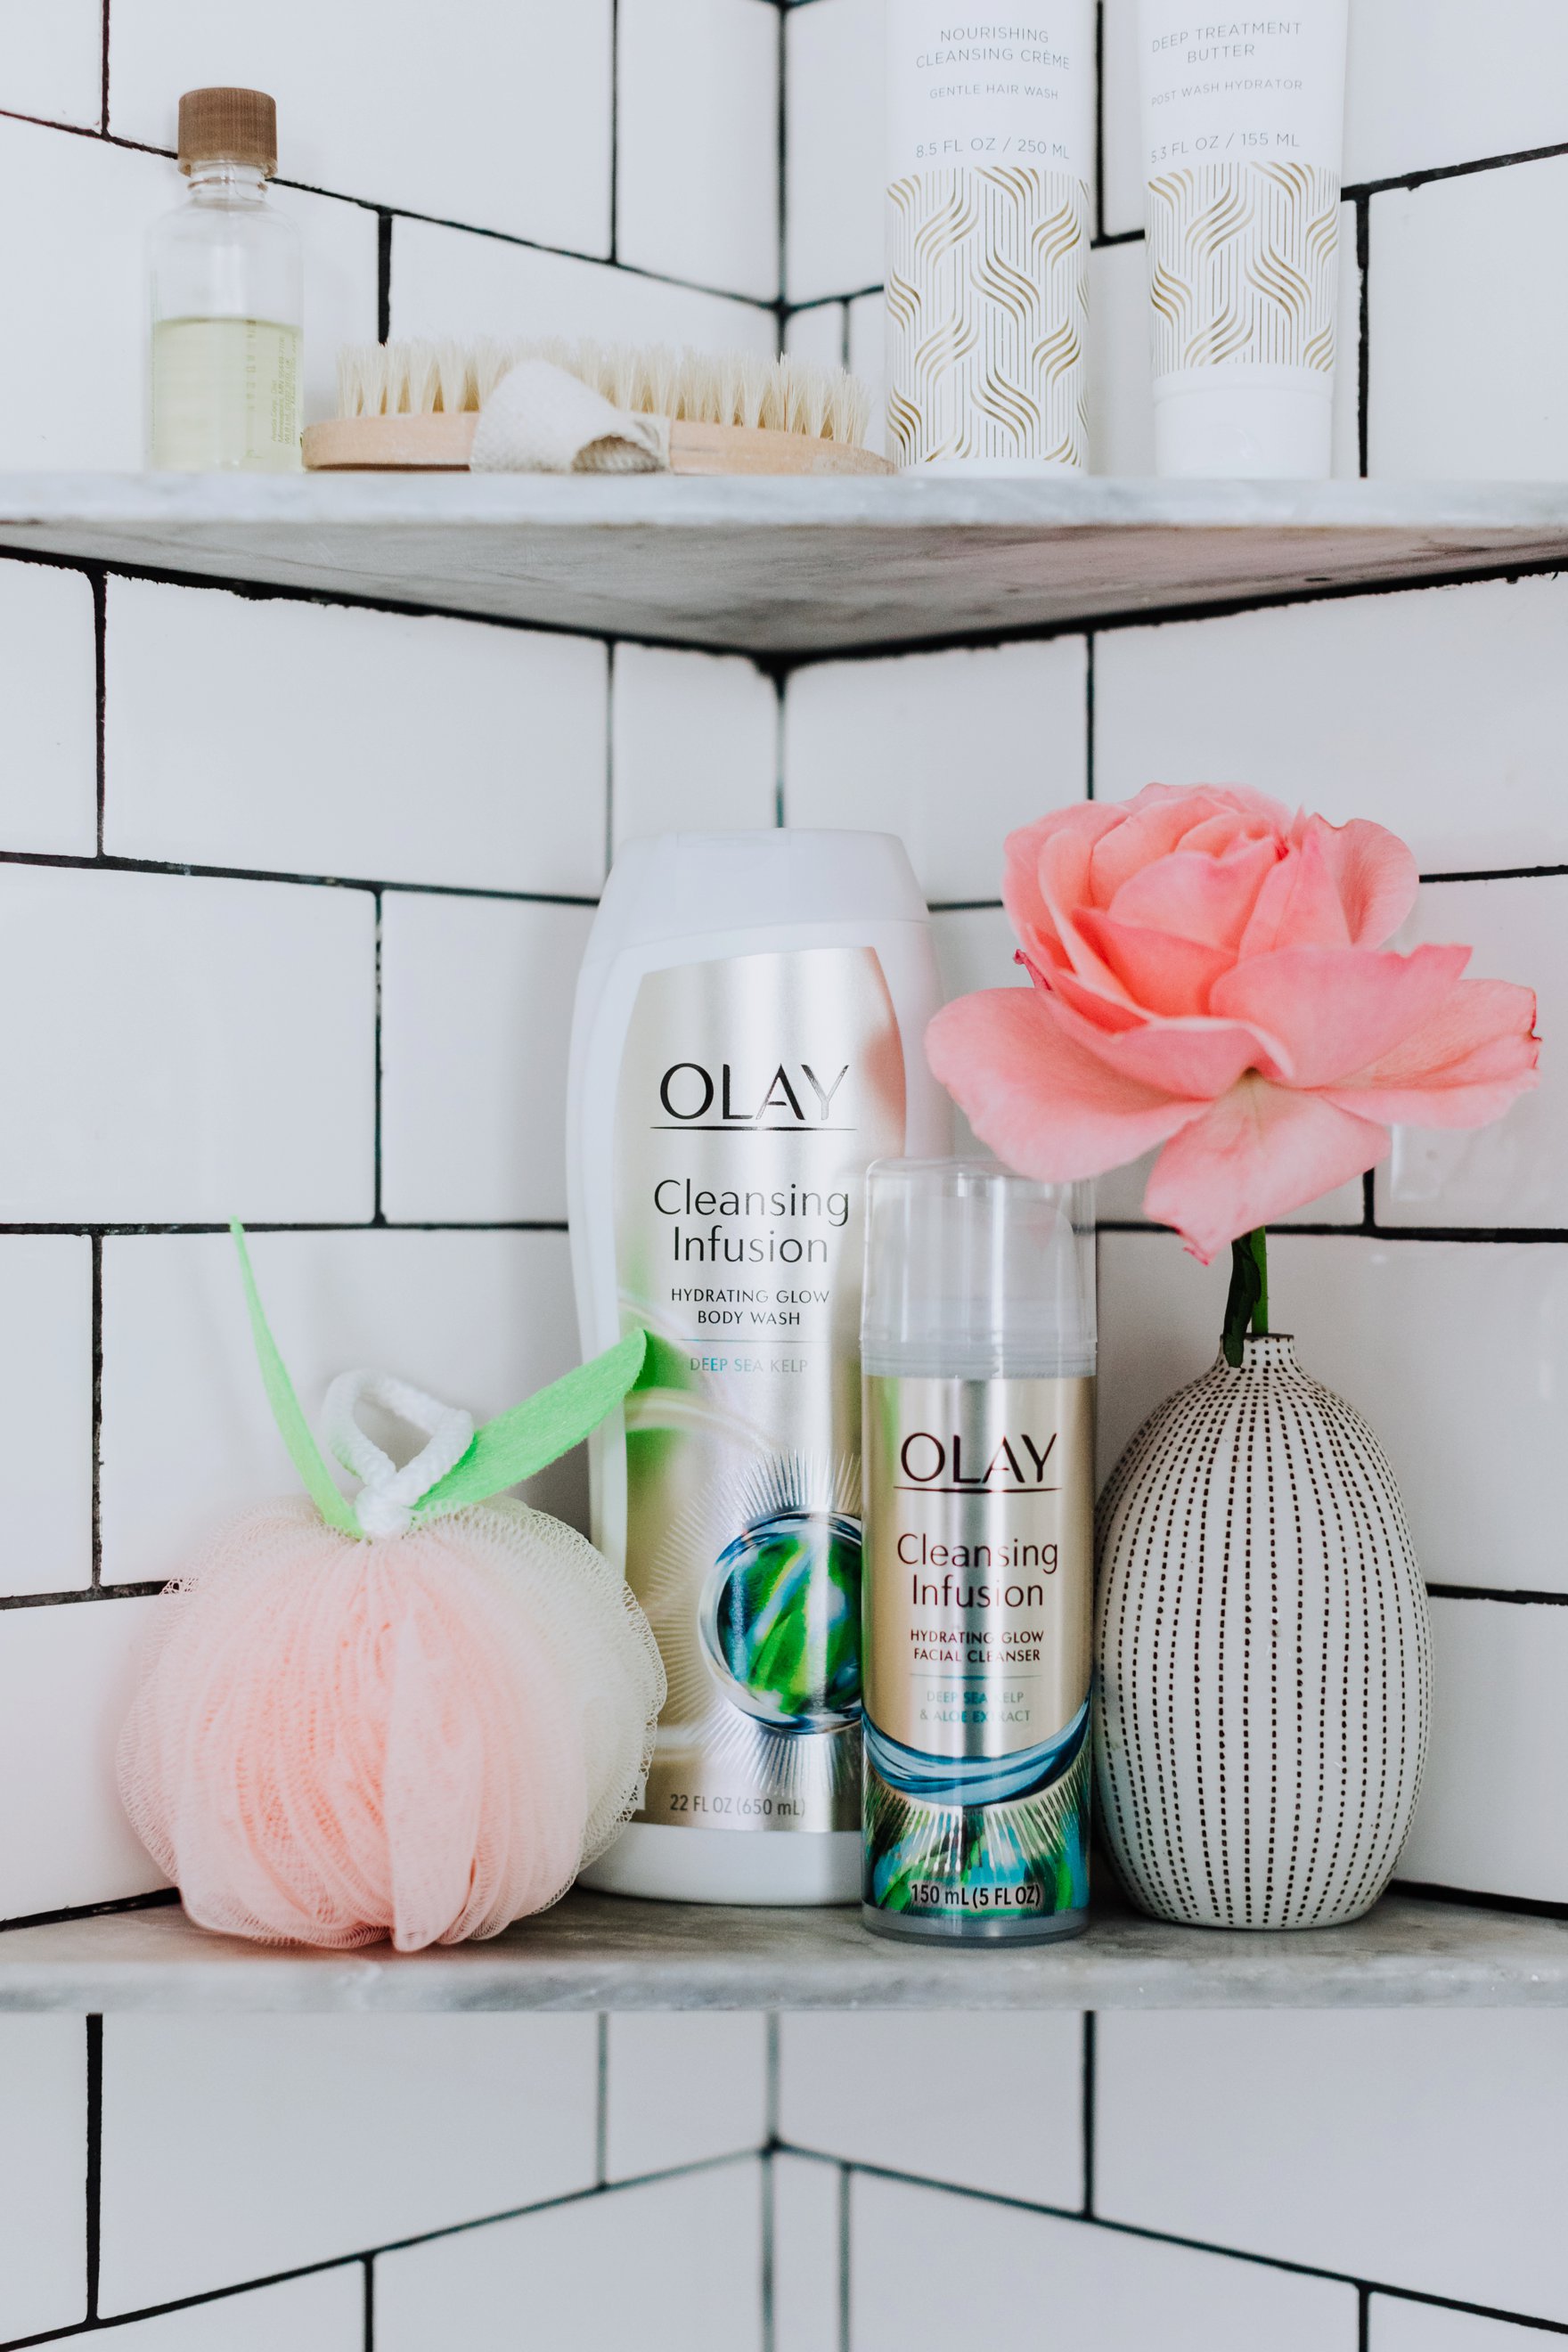 Olay Cleansing Infusions